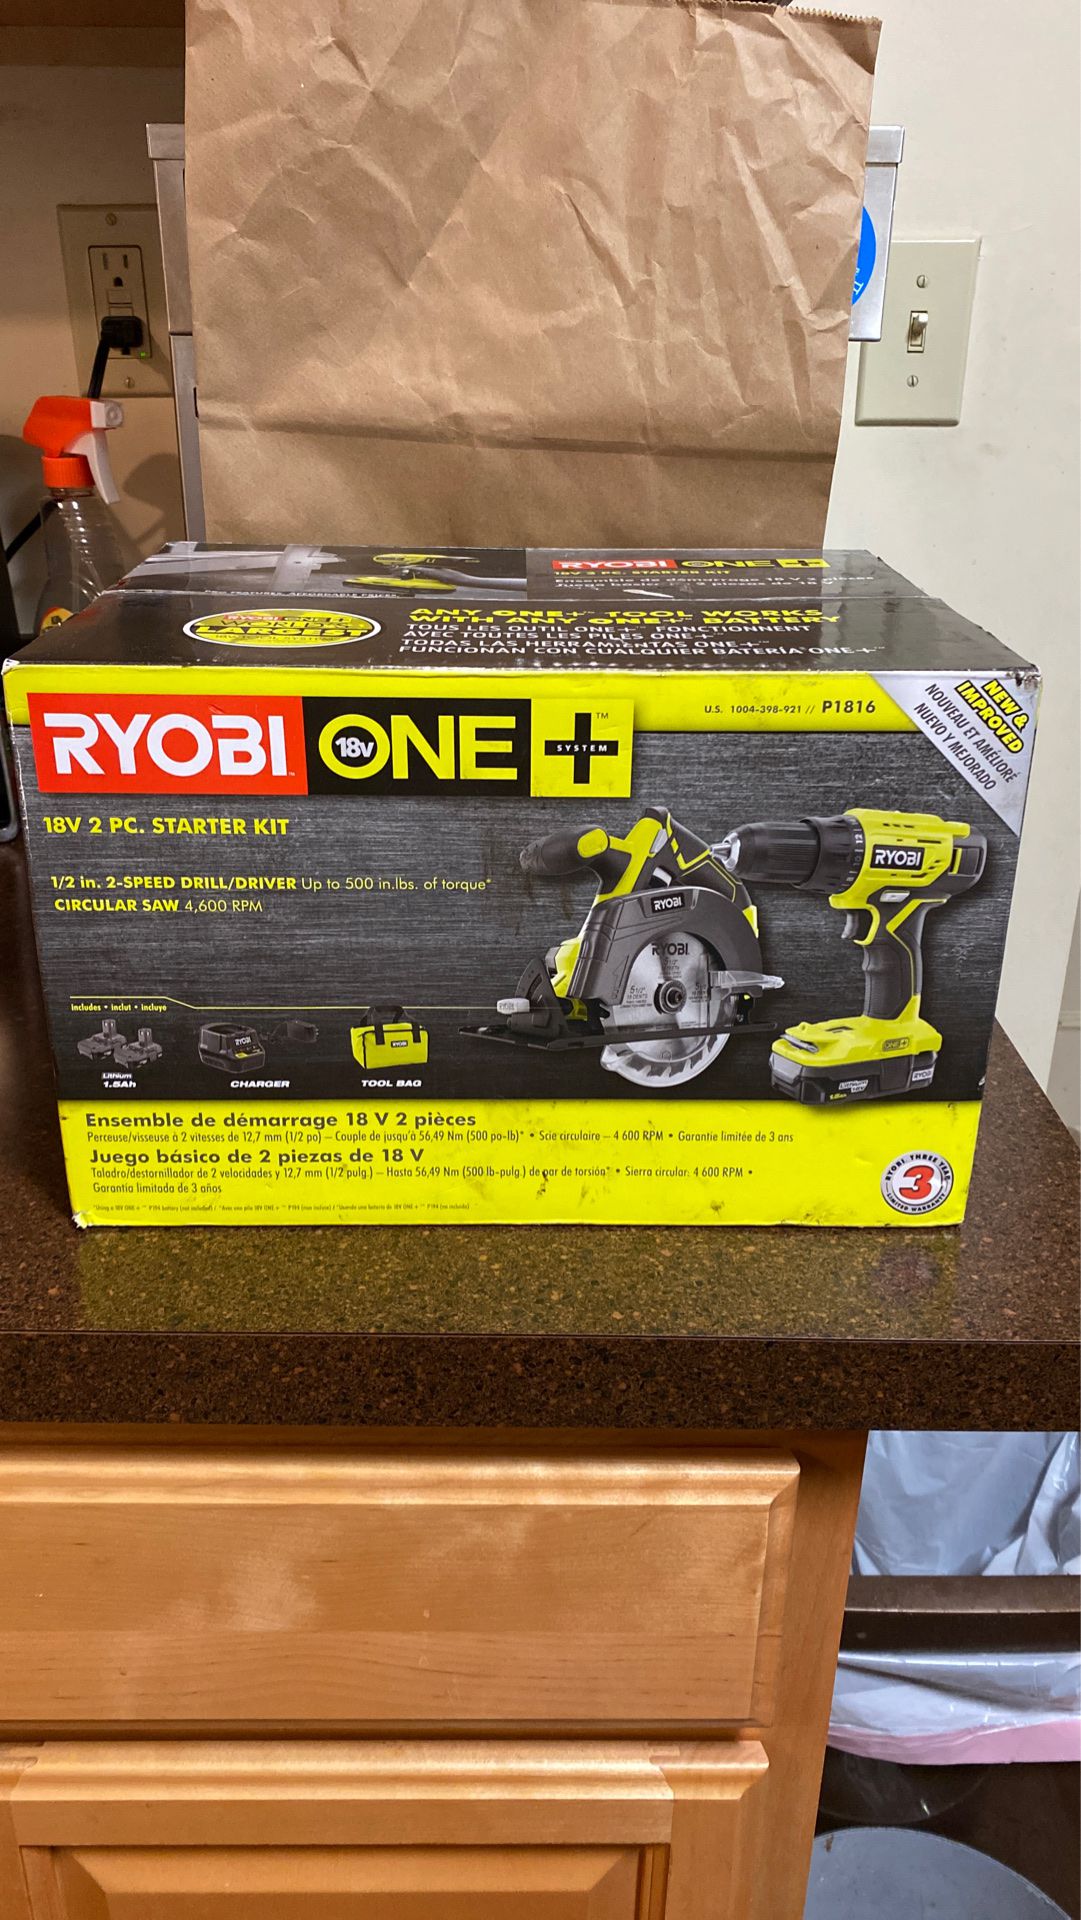 New in box ryobi one + 18 v 2 peice starter kit 1/2 in. 2speed drill/driver circular saw 4,600 rpm comes with 2portable chargers 1 wall & tool bag